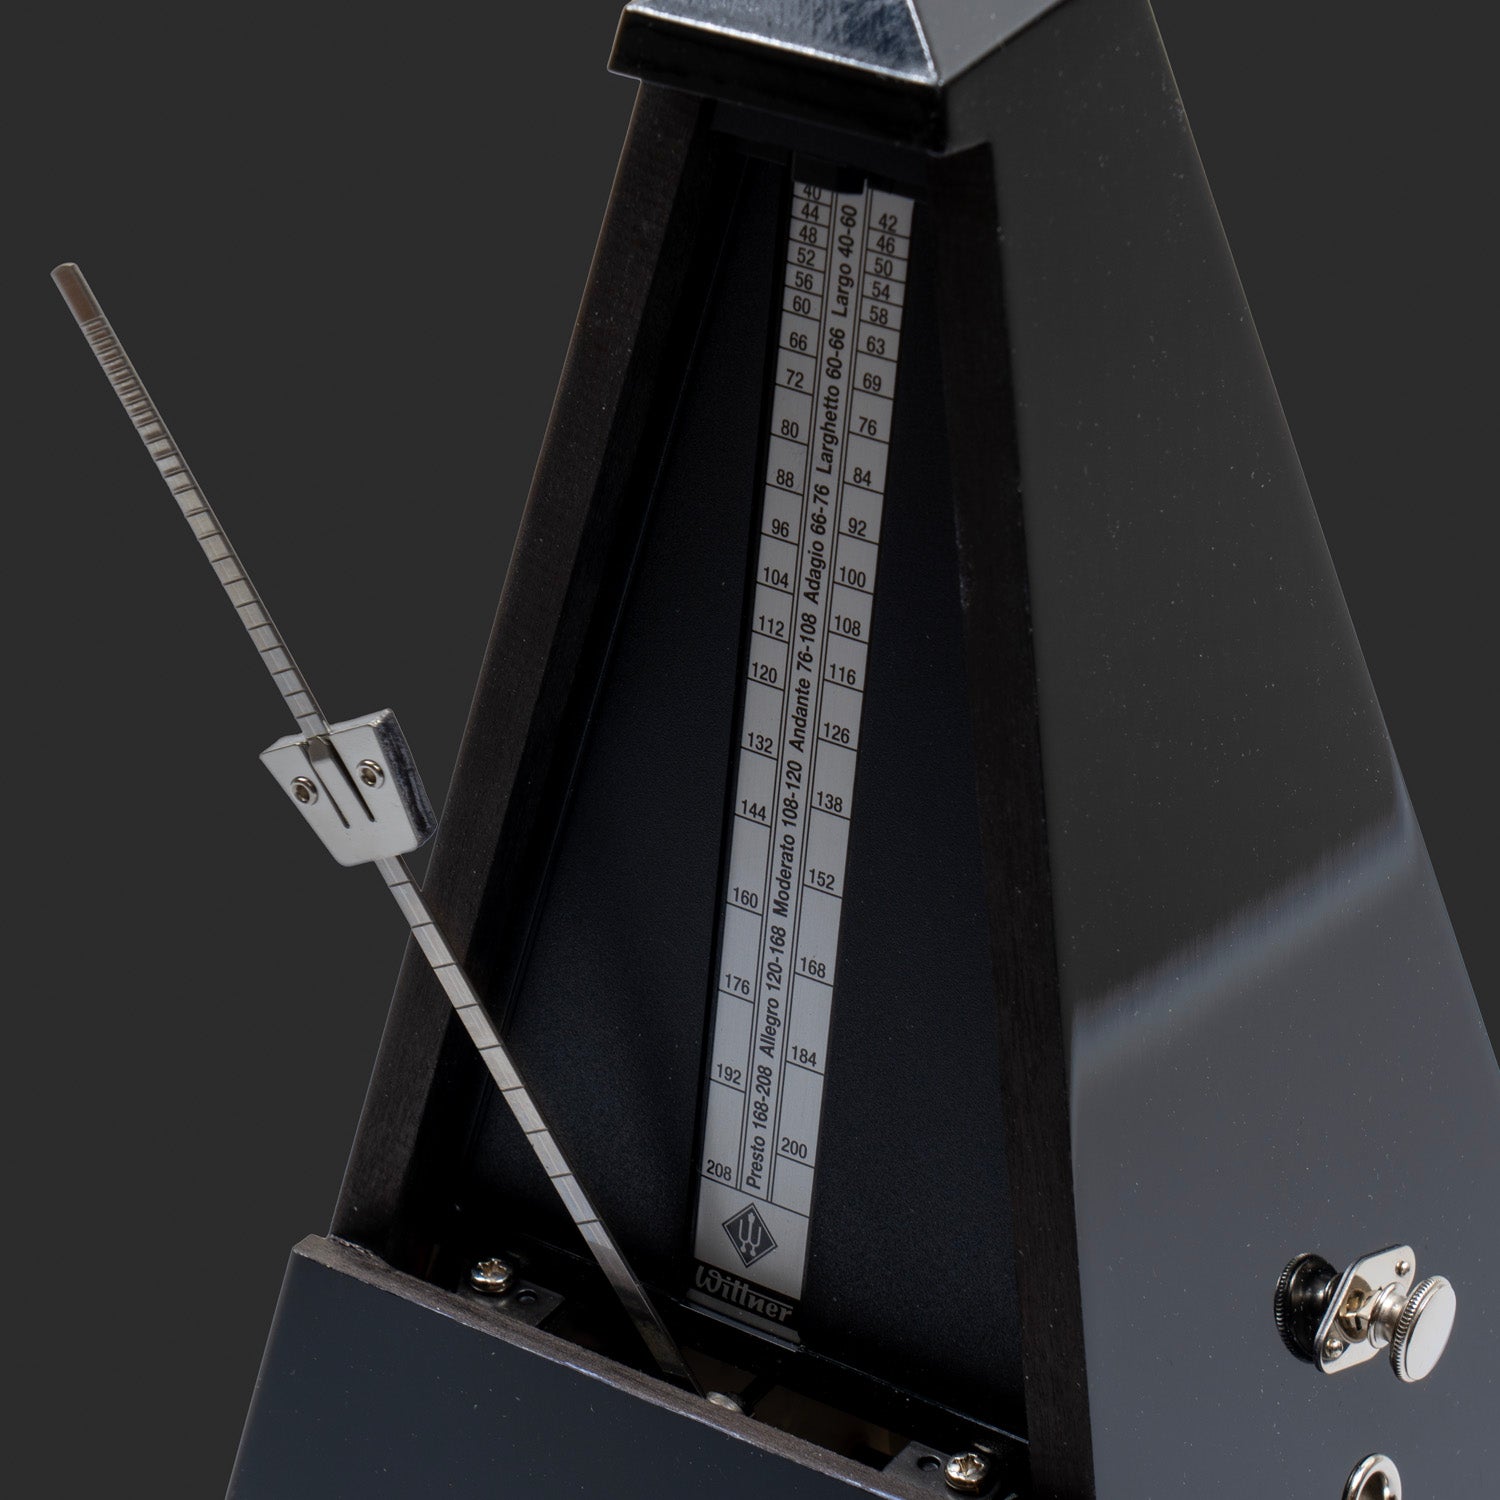 Metronome in Gloss Black Solid Wooden Casing